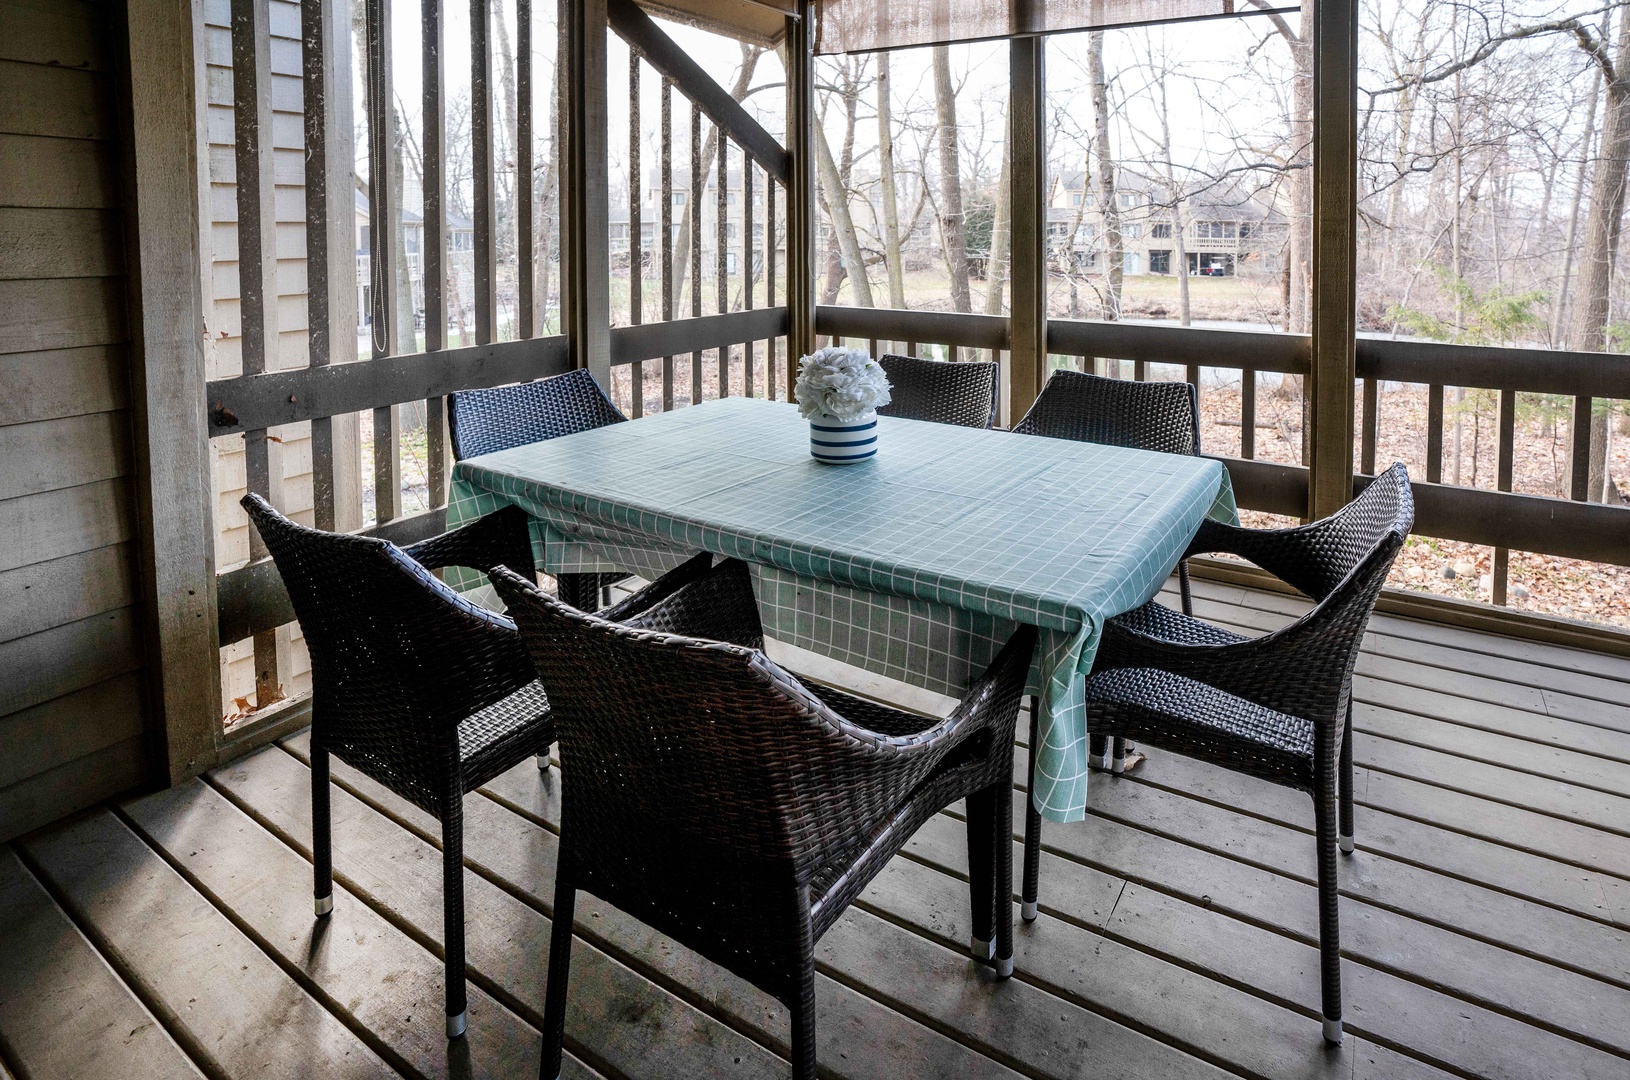 Enjoy a cup of coffee or dine al fresco on the patio, with seating for 6